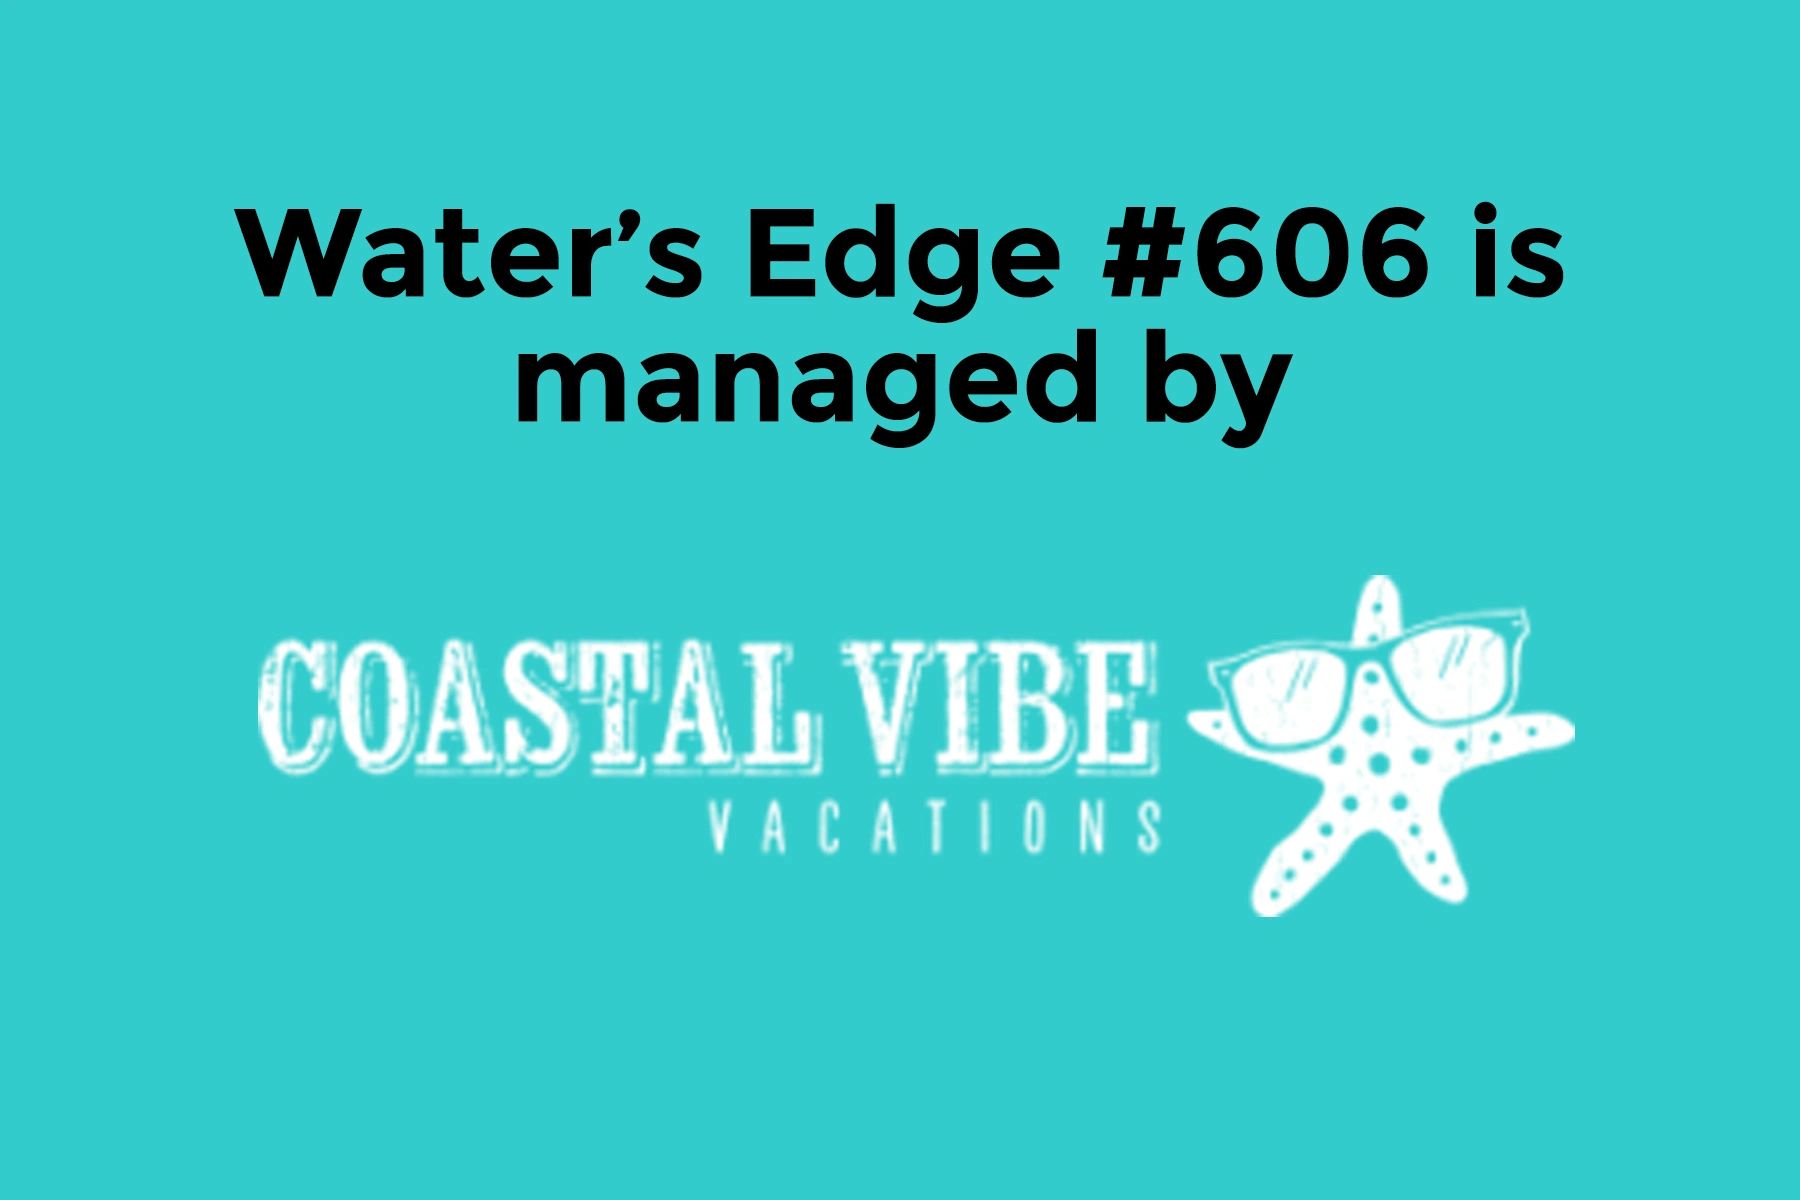 Coastal Vibe Vacations is a family-owned business that manages select properties on Okaloosa Island.